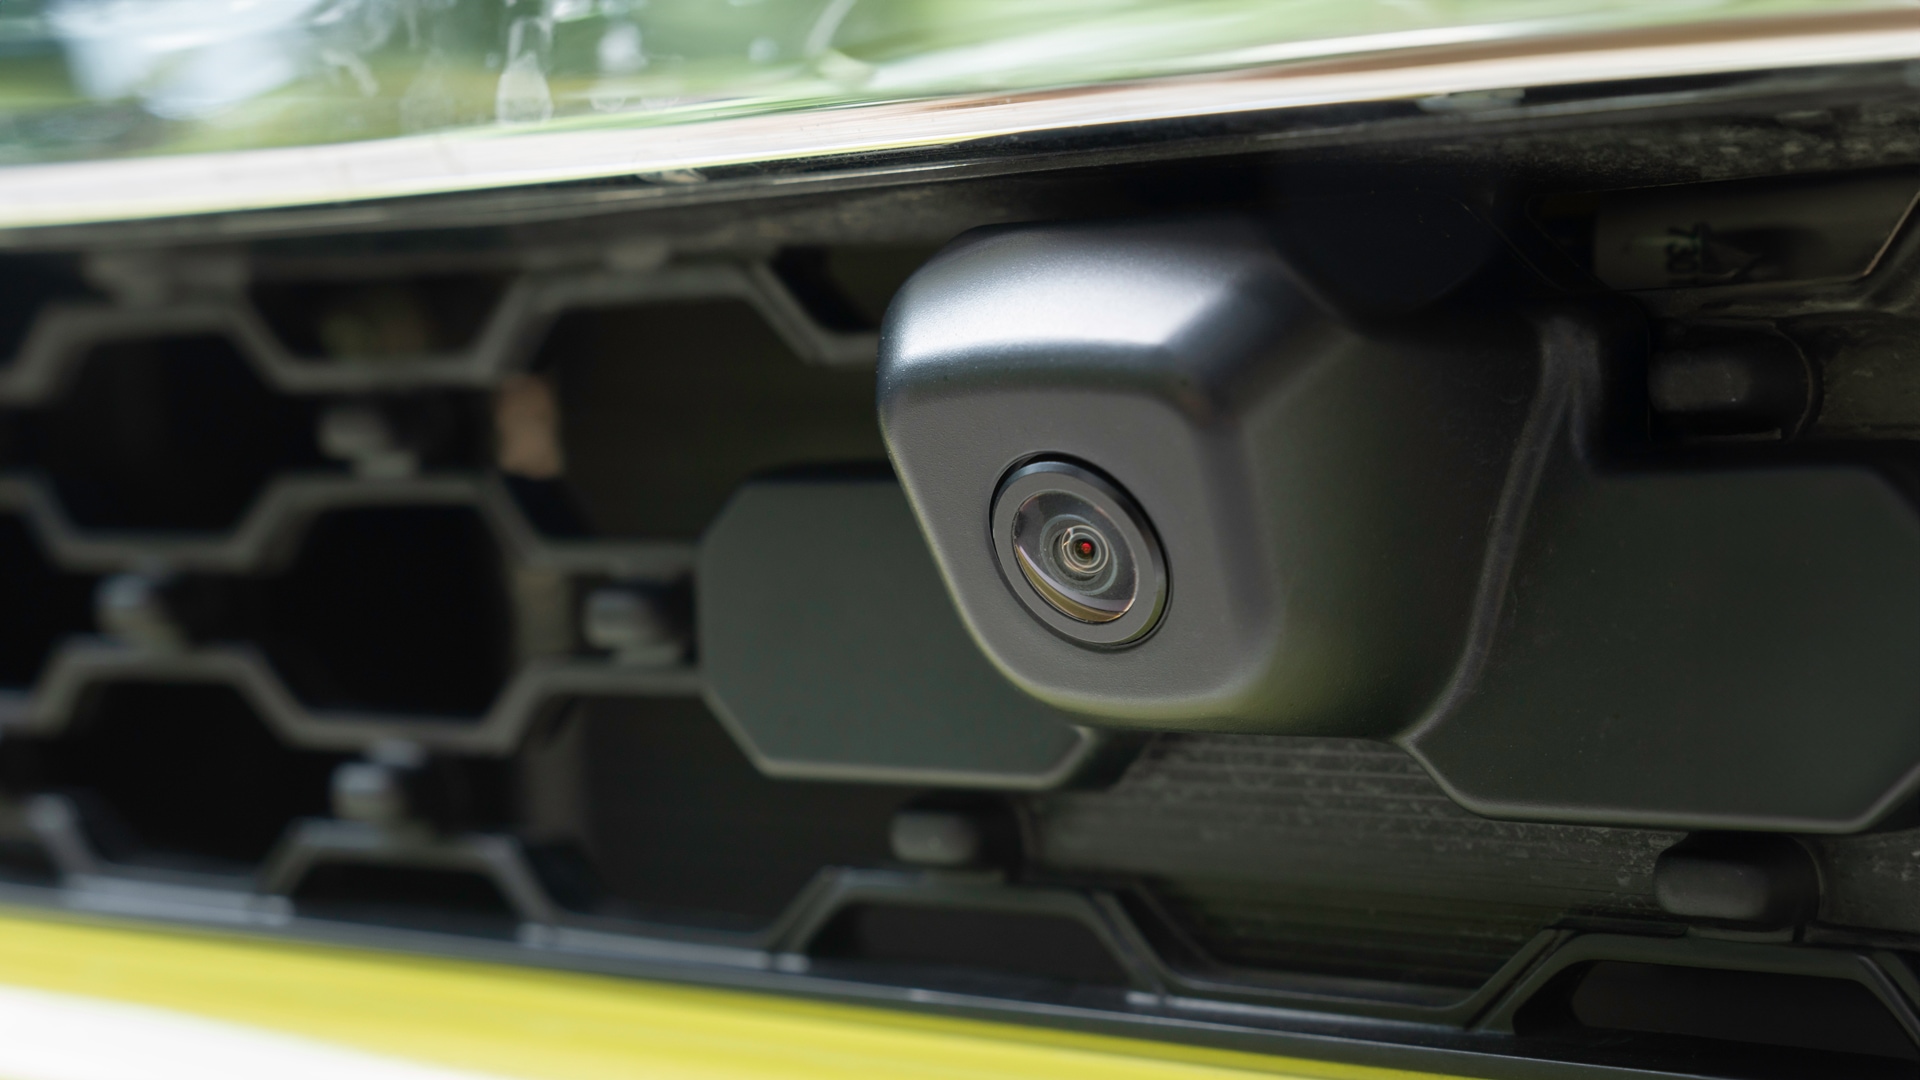 Picture of a car grill camera